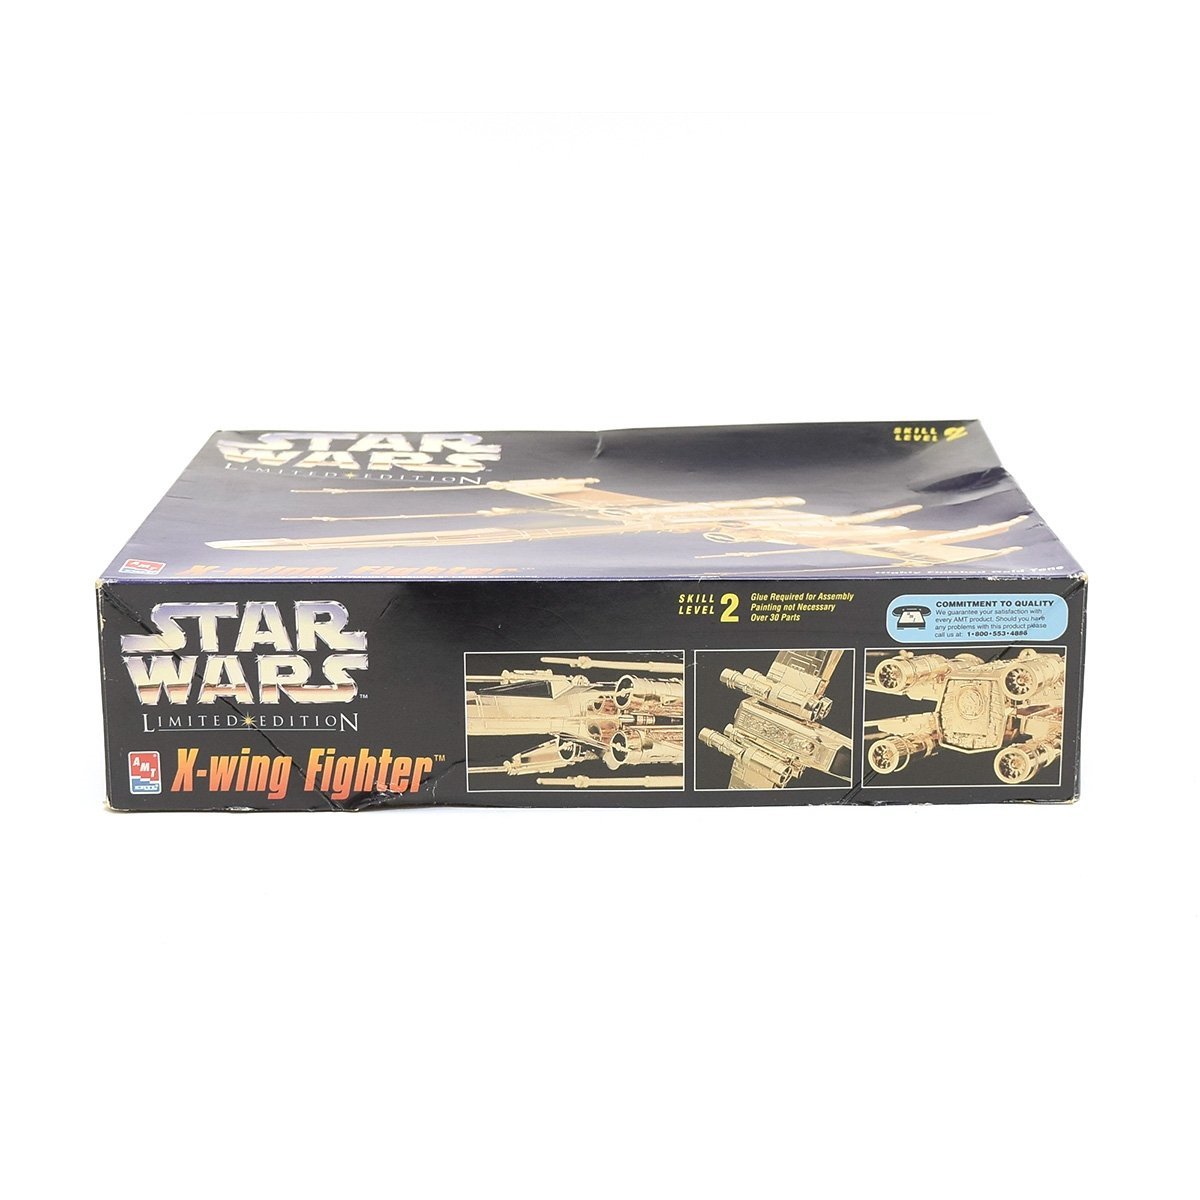 *503133 unused goods AMT plastic model X-wing Gold Star Wars LMITED EDITION